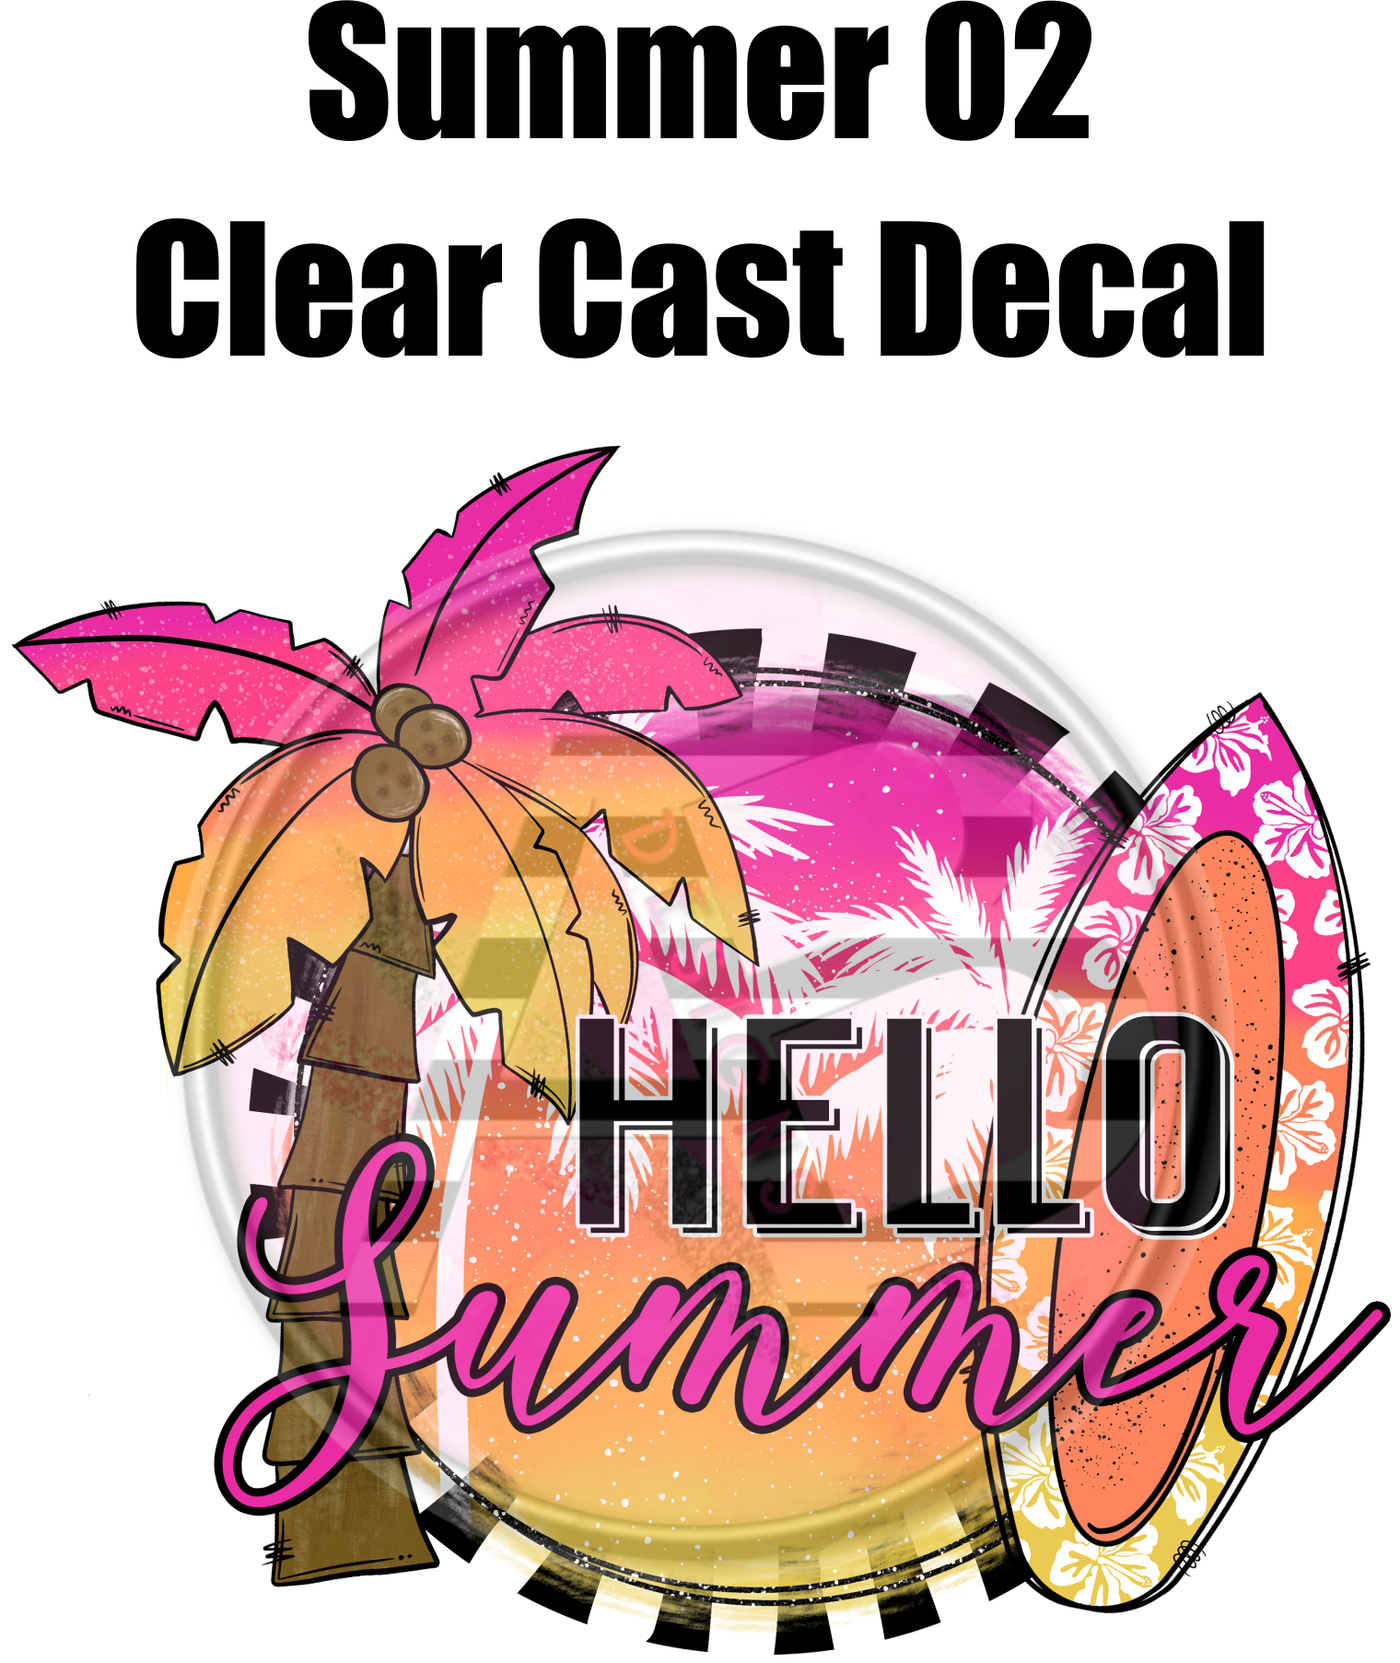 Summer 02 - Clear Cast Decal - 58